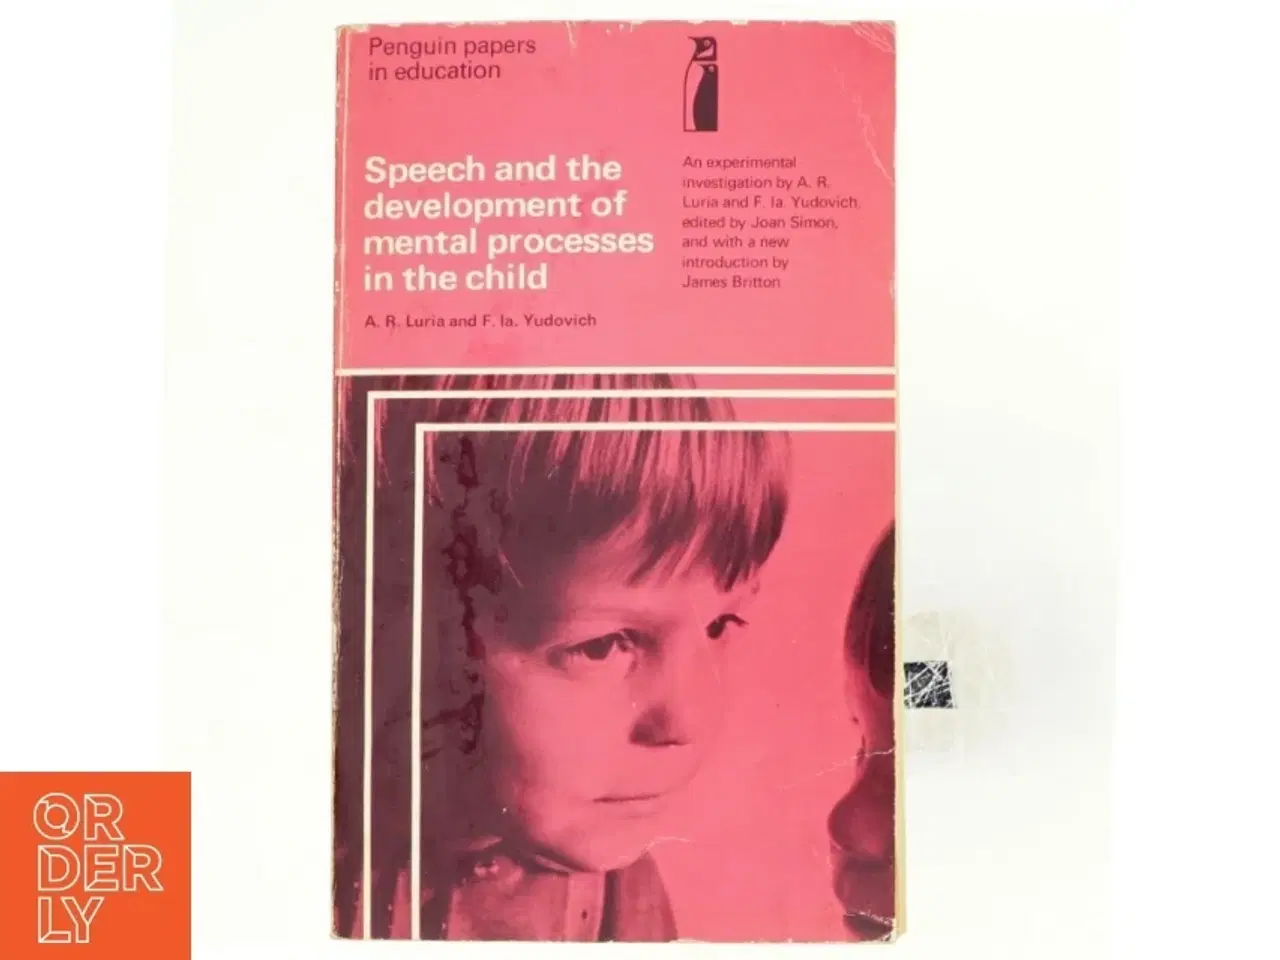 Billede 1 - Speech and the Development of Mental Processes in the Child: An Experimental Investigation Paperback – February 28, 1972 by A.R. Luria